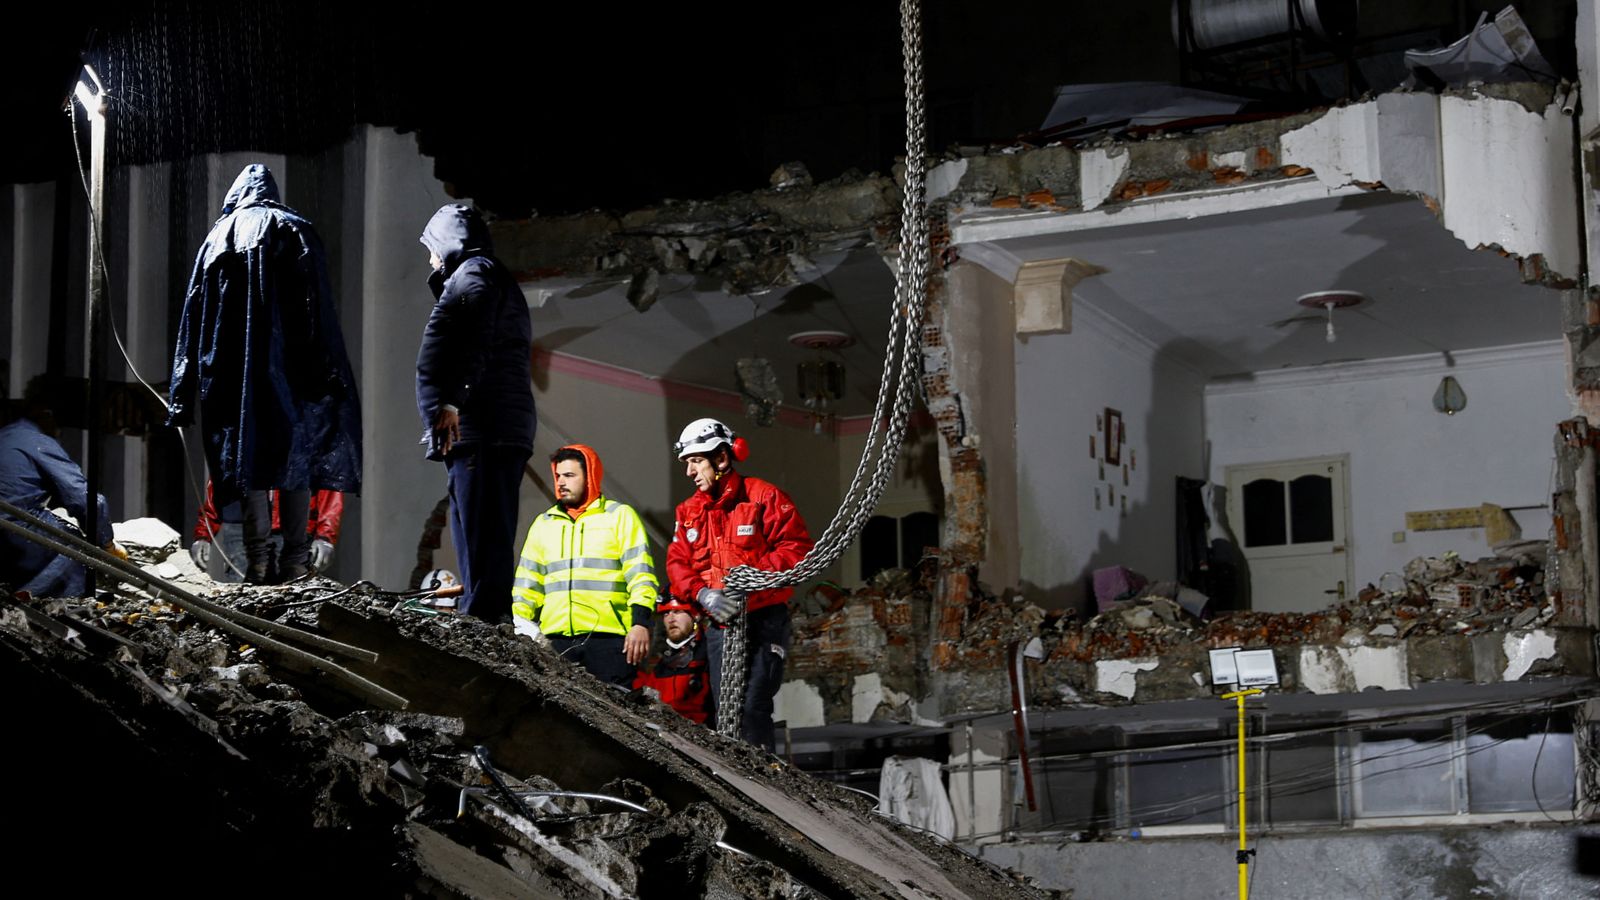 4,310 confirmed dead as rescuers in Turkey and Syria search for survivors | Earthquake latest